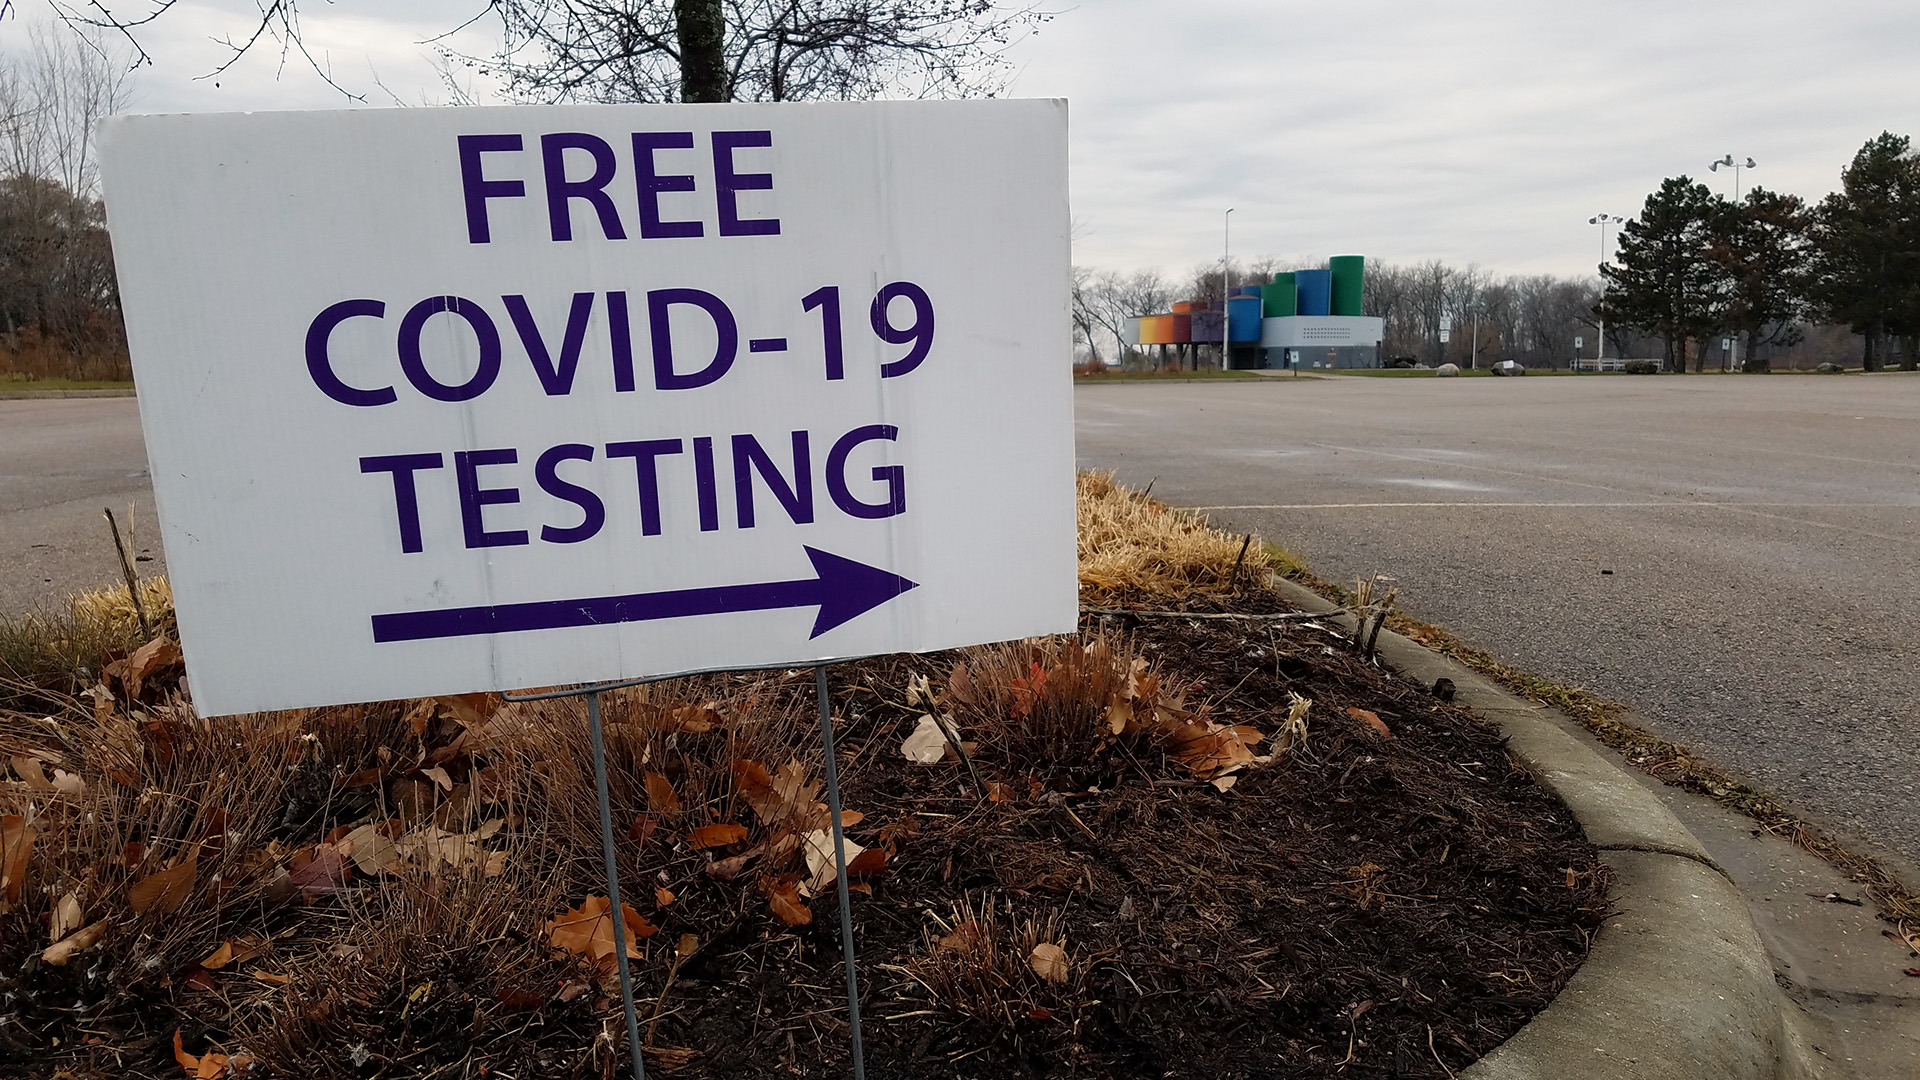 A lawn sign in a parking lot divider reads "FREE COVID-19 TESTING" with an arrow pointing right.